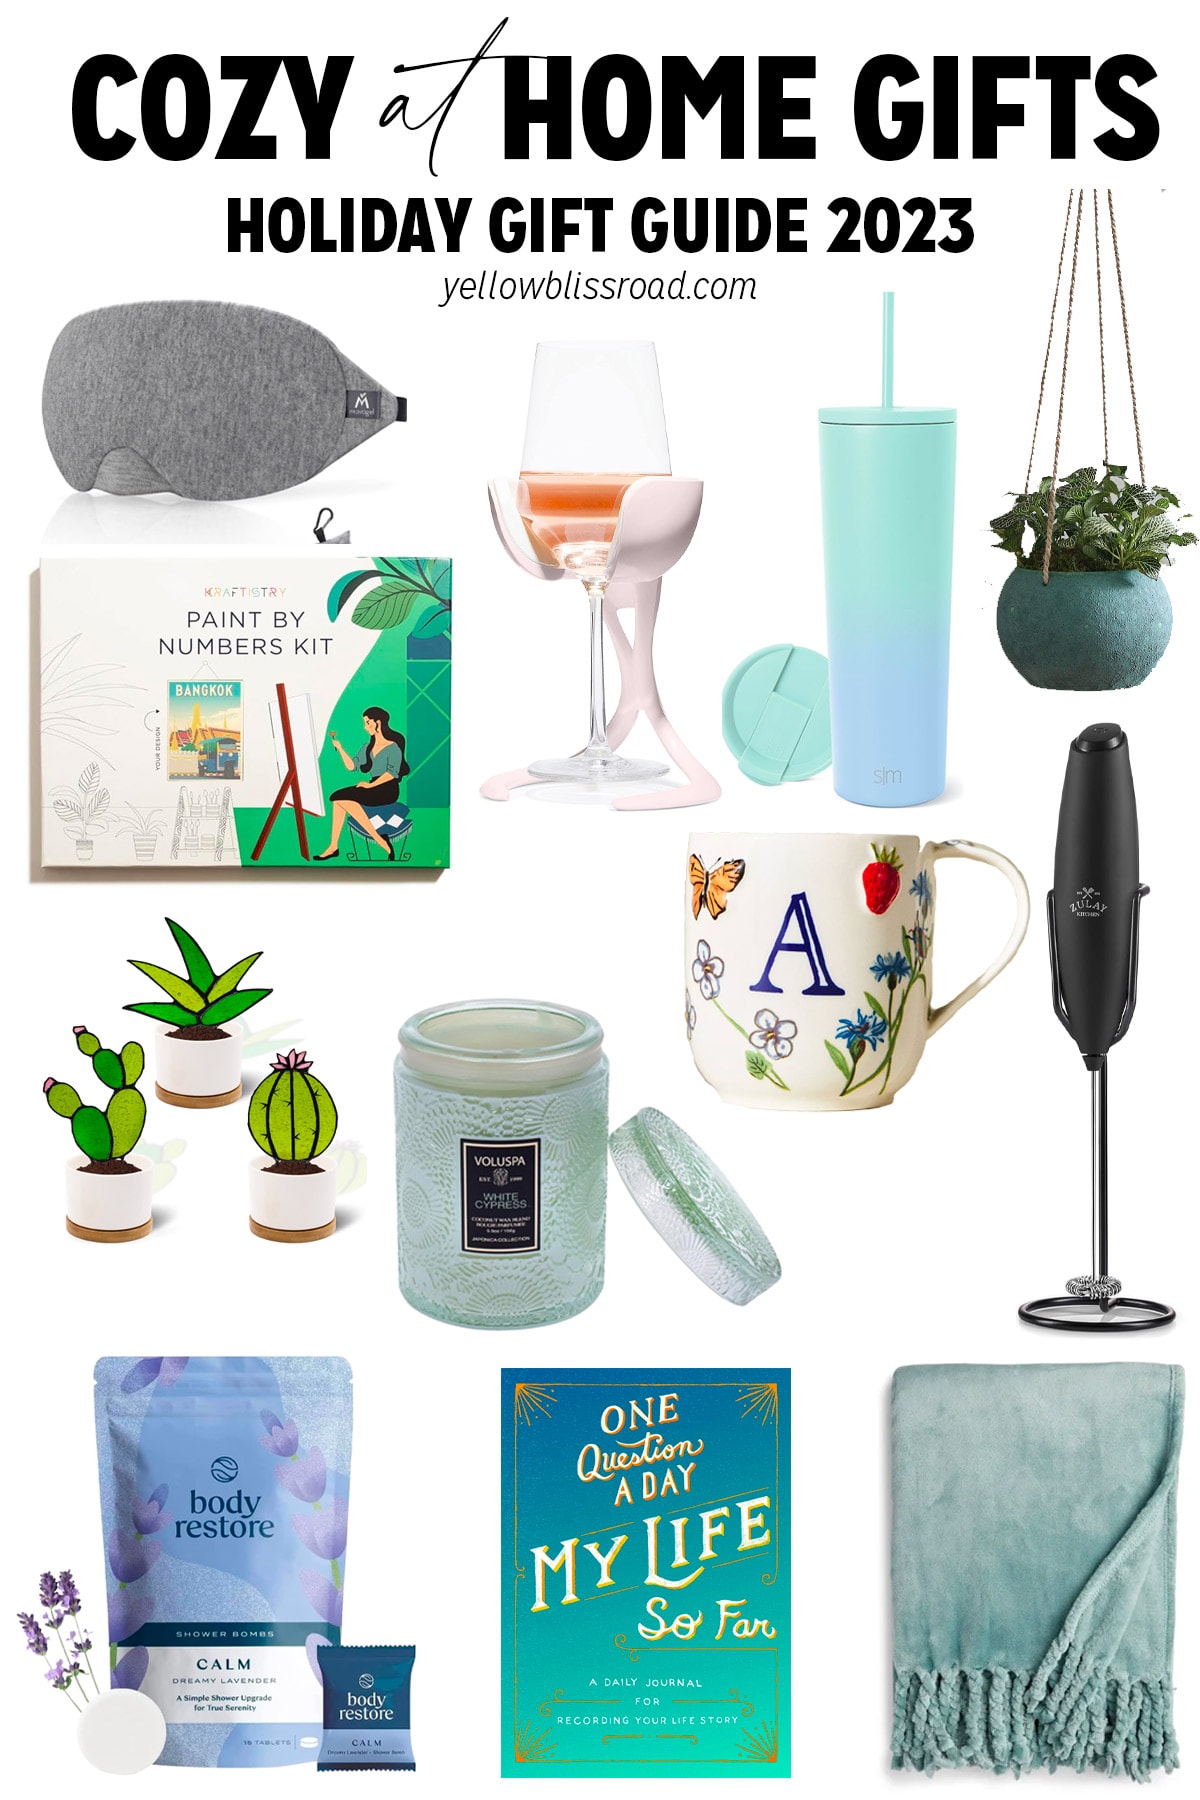 Our Top 10 Favourite Holiday Gifts for 2022 - WaySpa